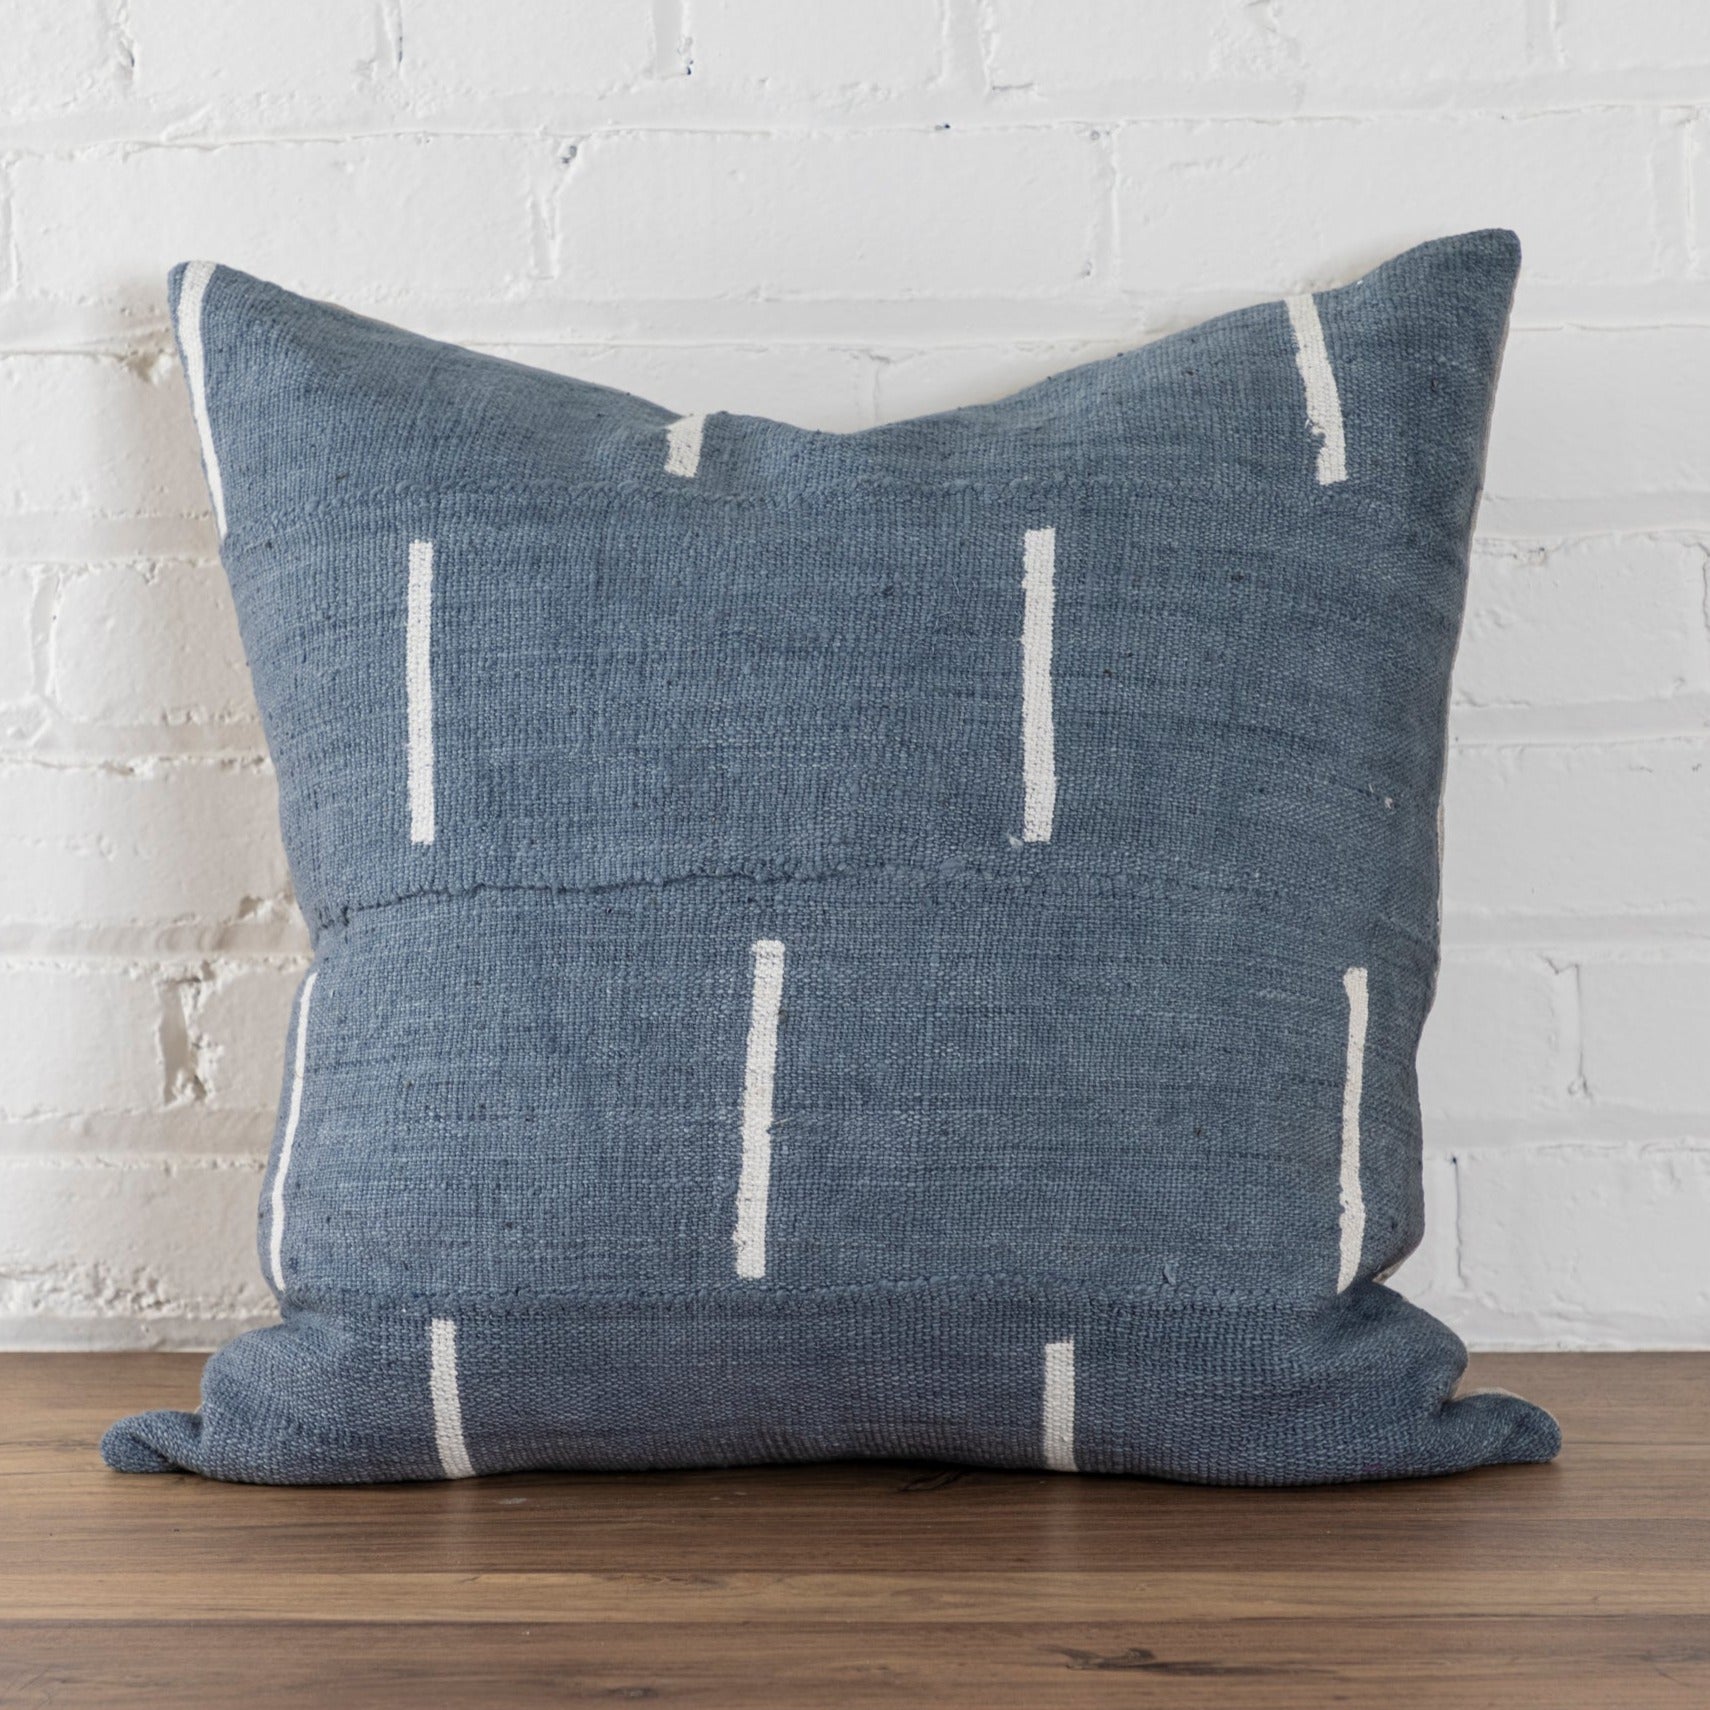 Mud Cloth Square Pillow, Blue / Grey with Dash Pattern